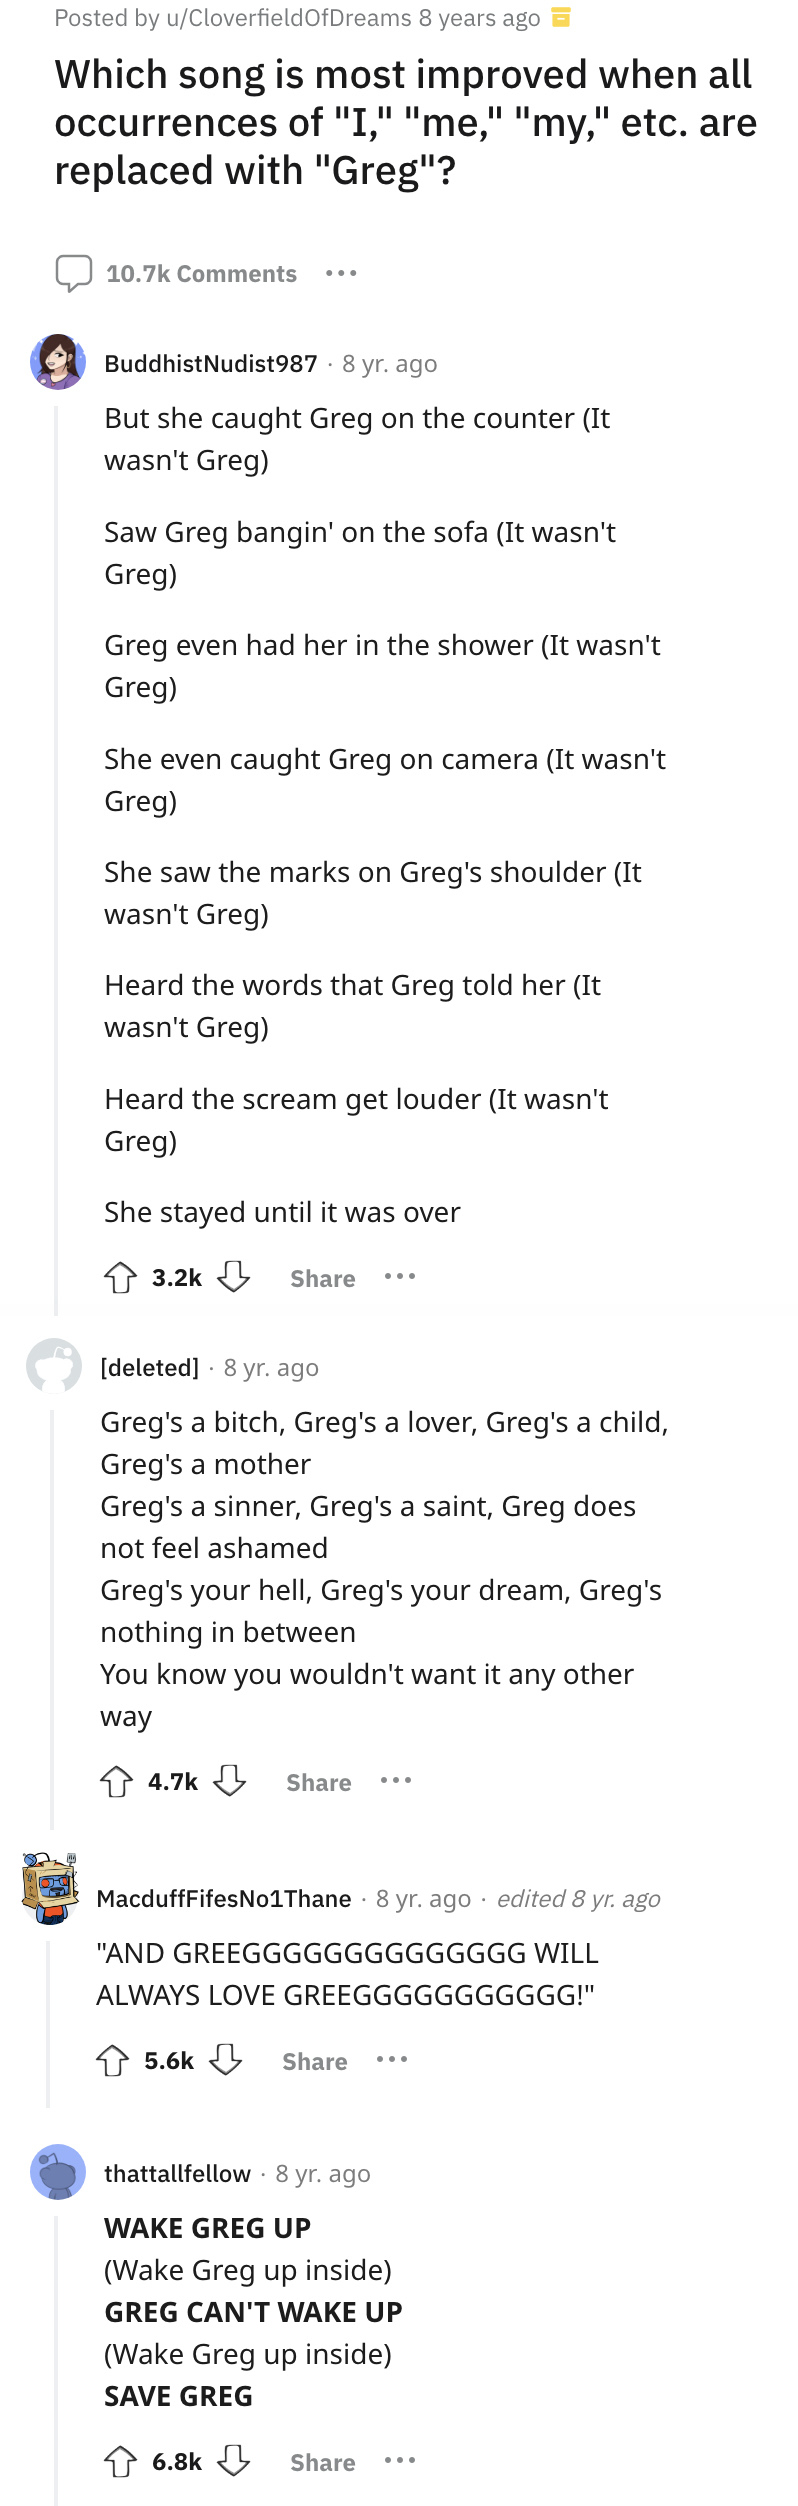 people replacing the lyrics to the song with the name greg